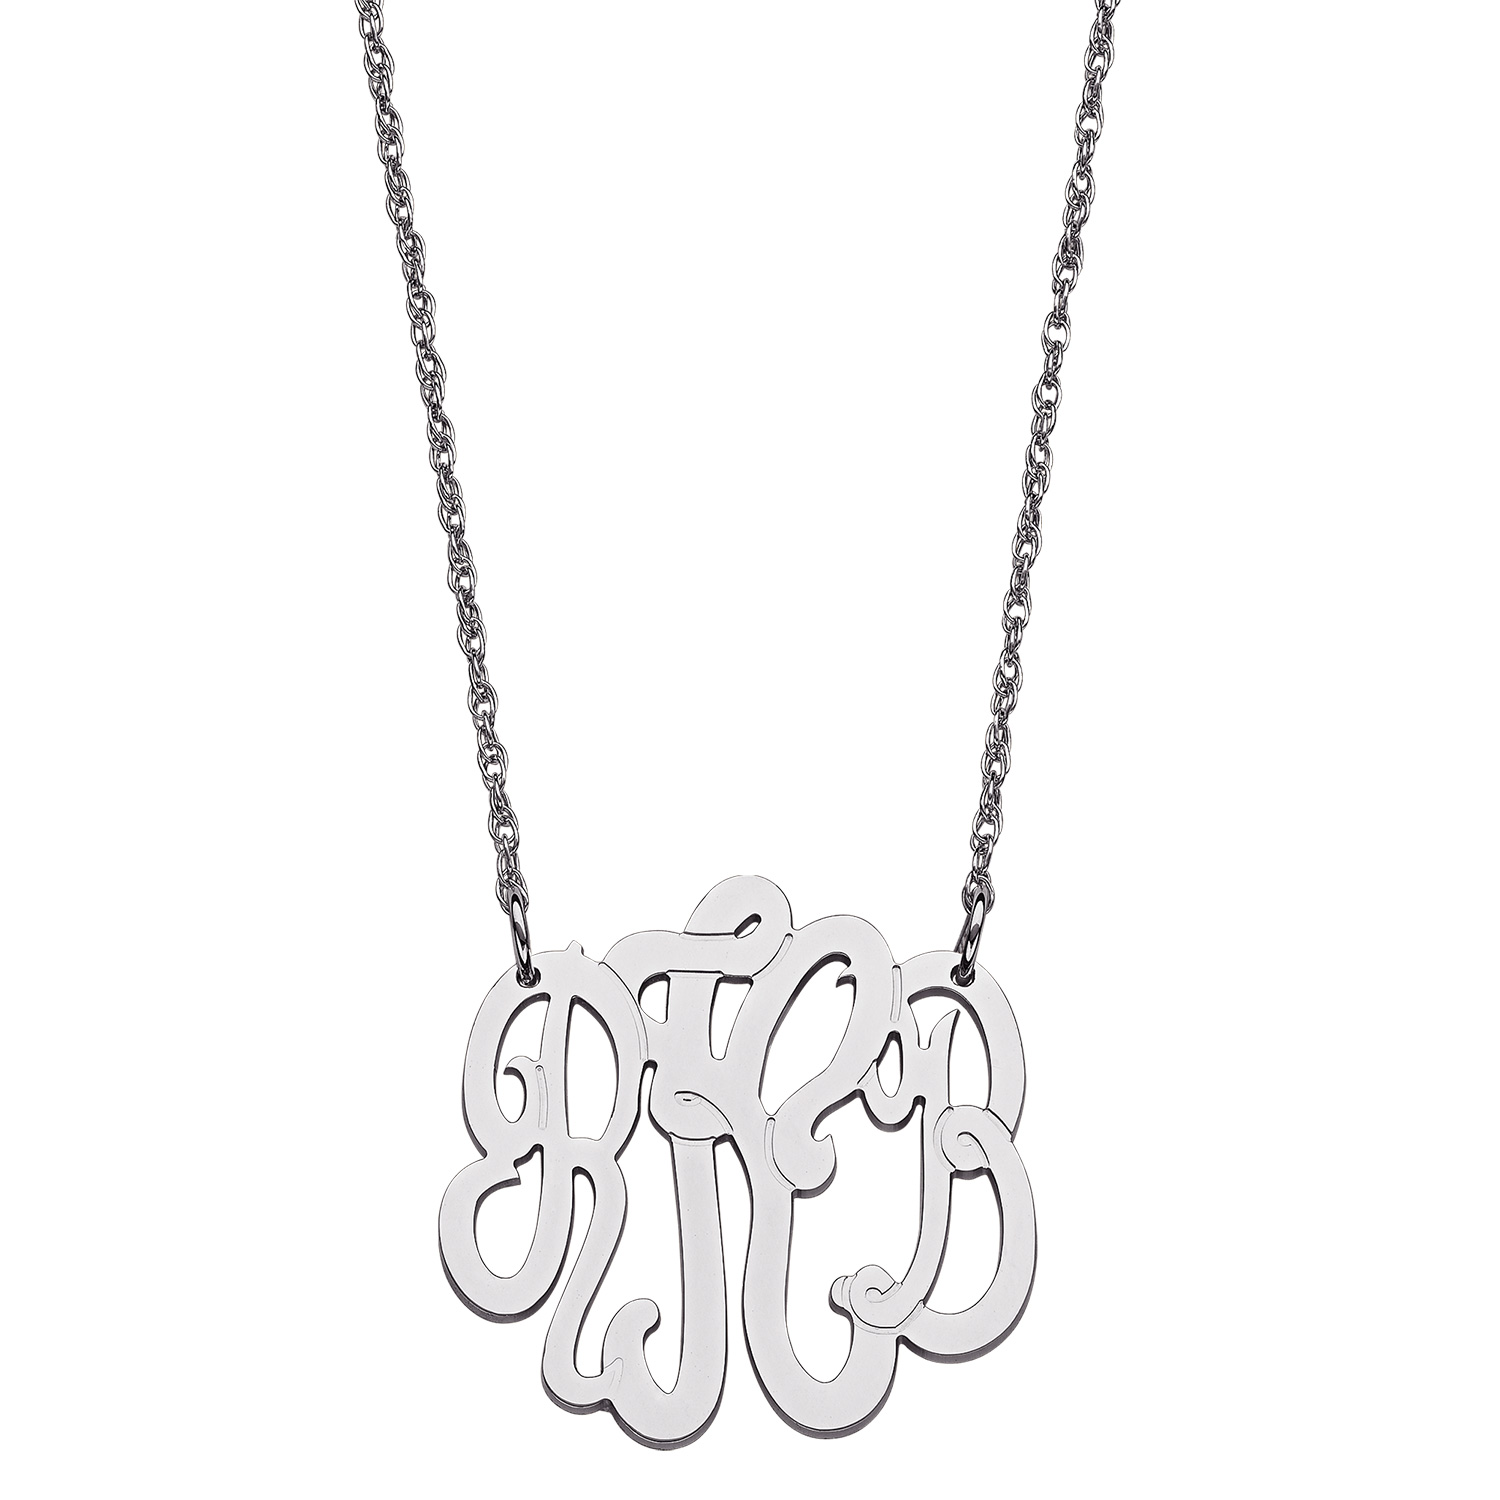  Sterling Silver 3 Initial Monogram Necklace - Small 18"